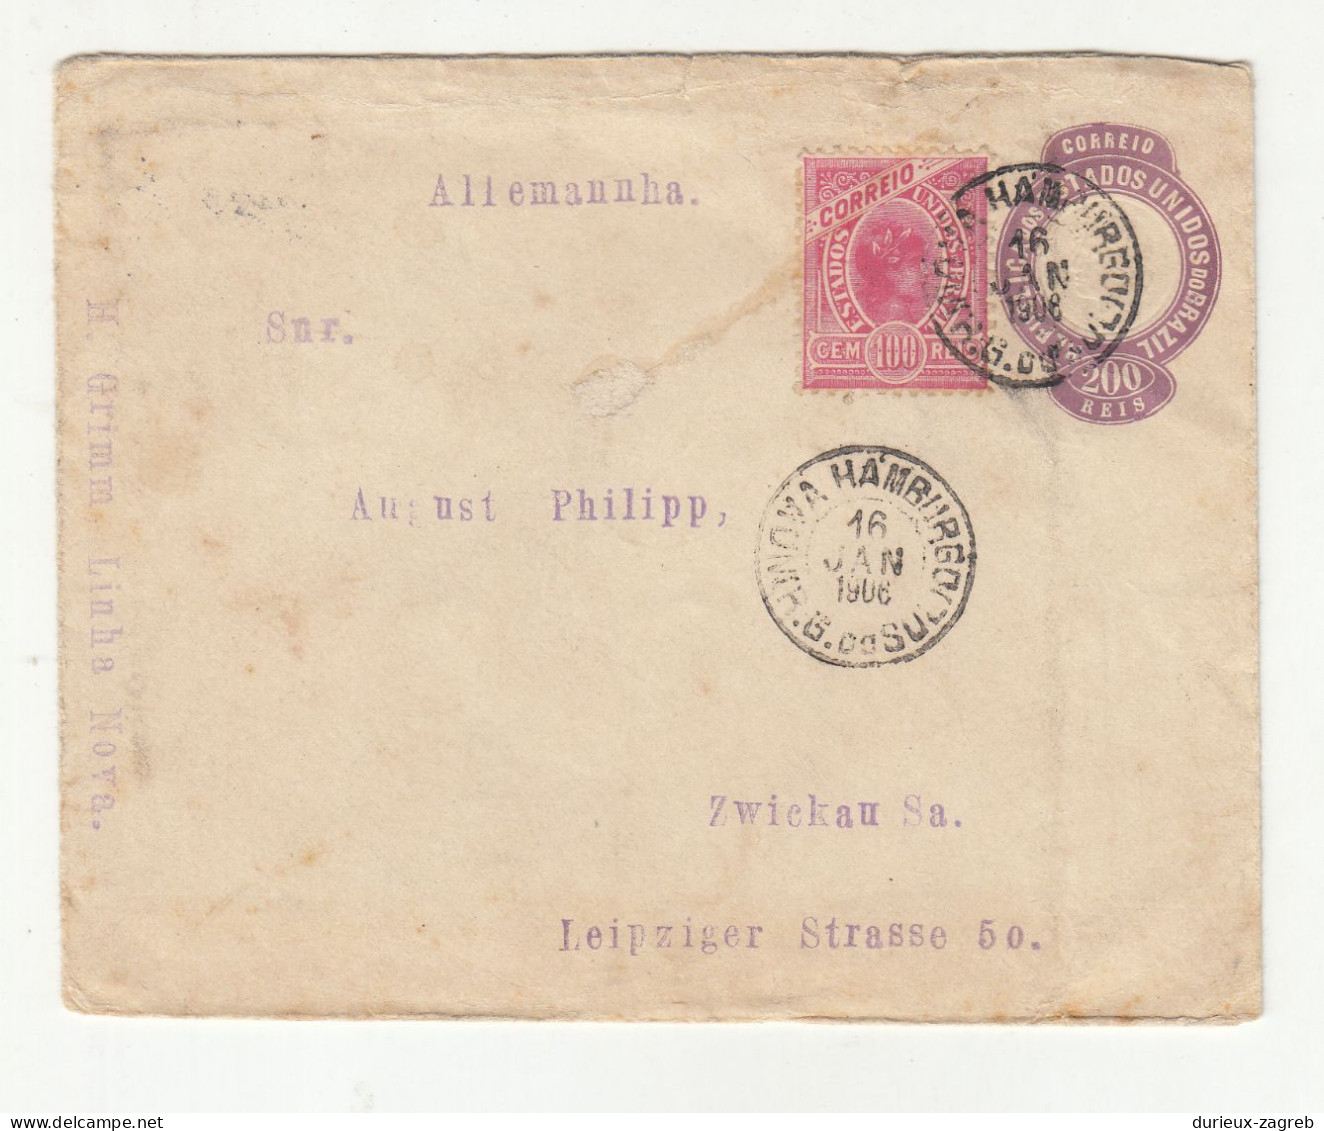 Brazil 200 Reis Postal Stationery Letter Cover Posted 1906 To Germany - Uprated B240401 - Postal Stationery